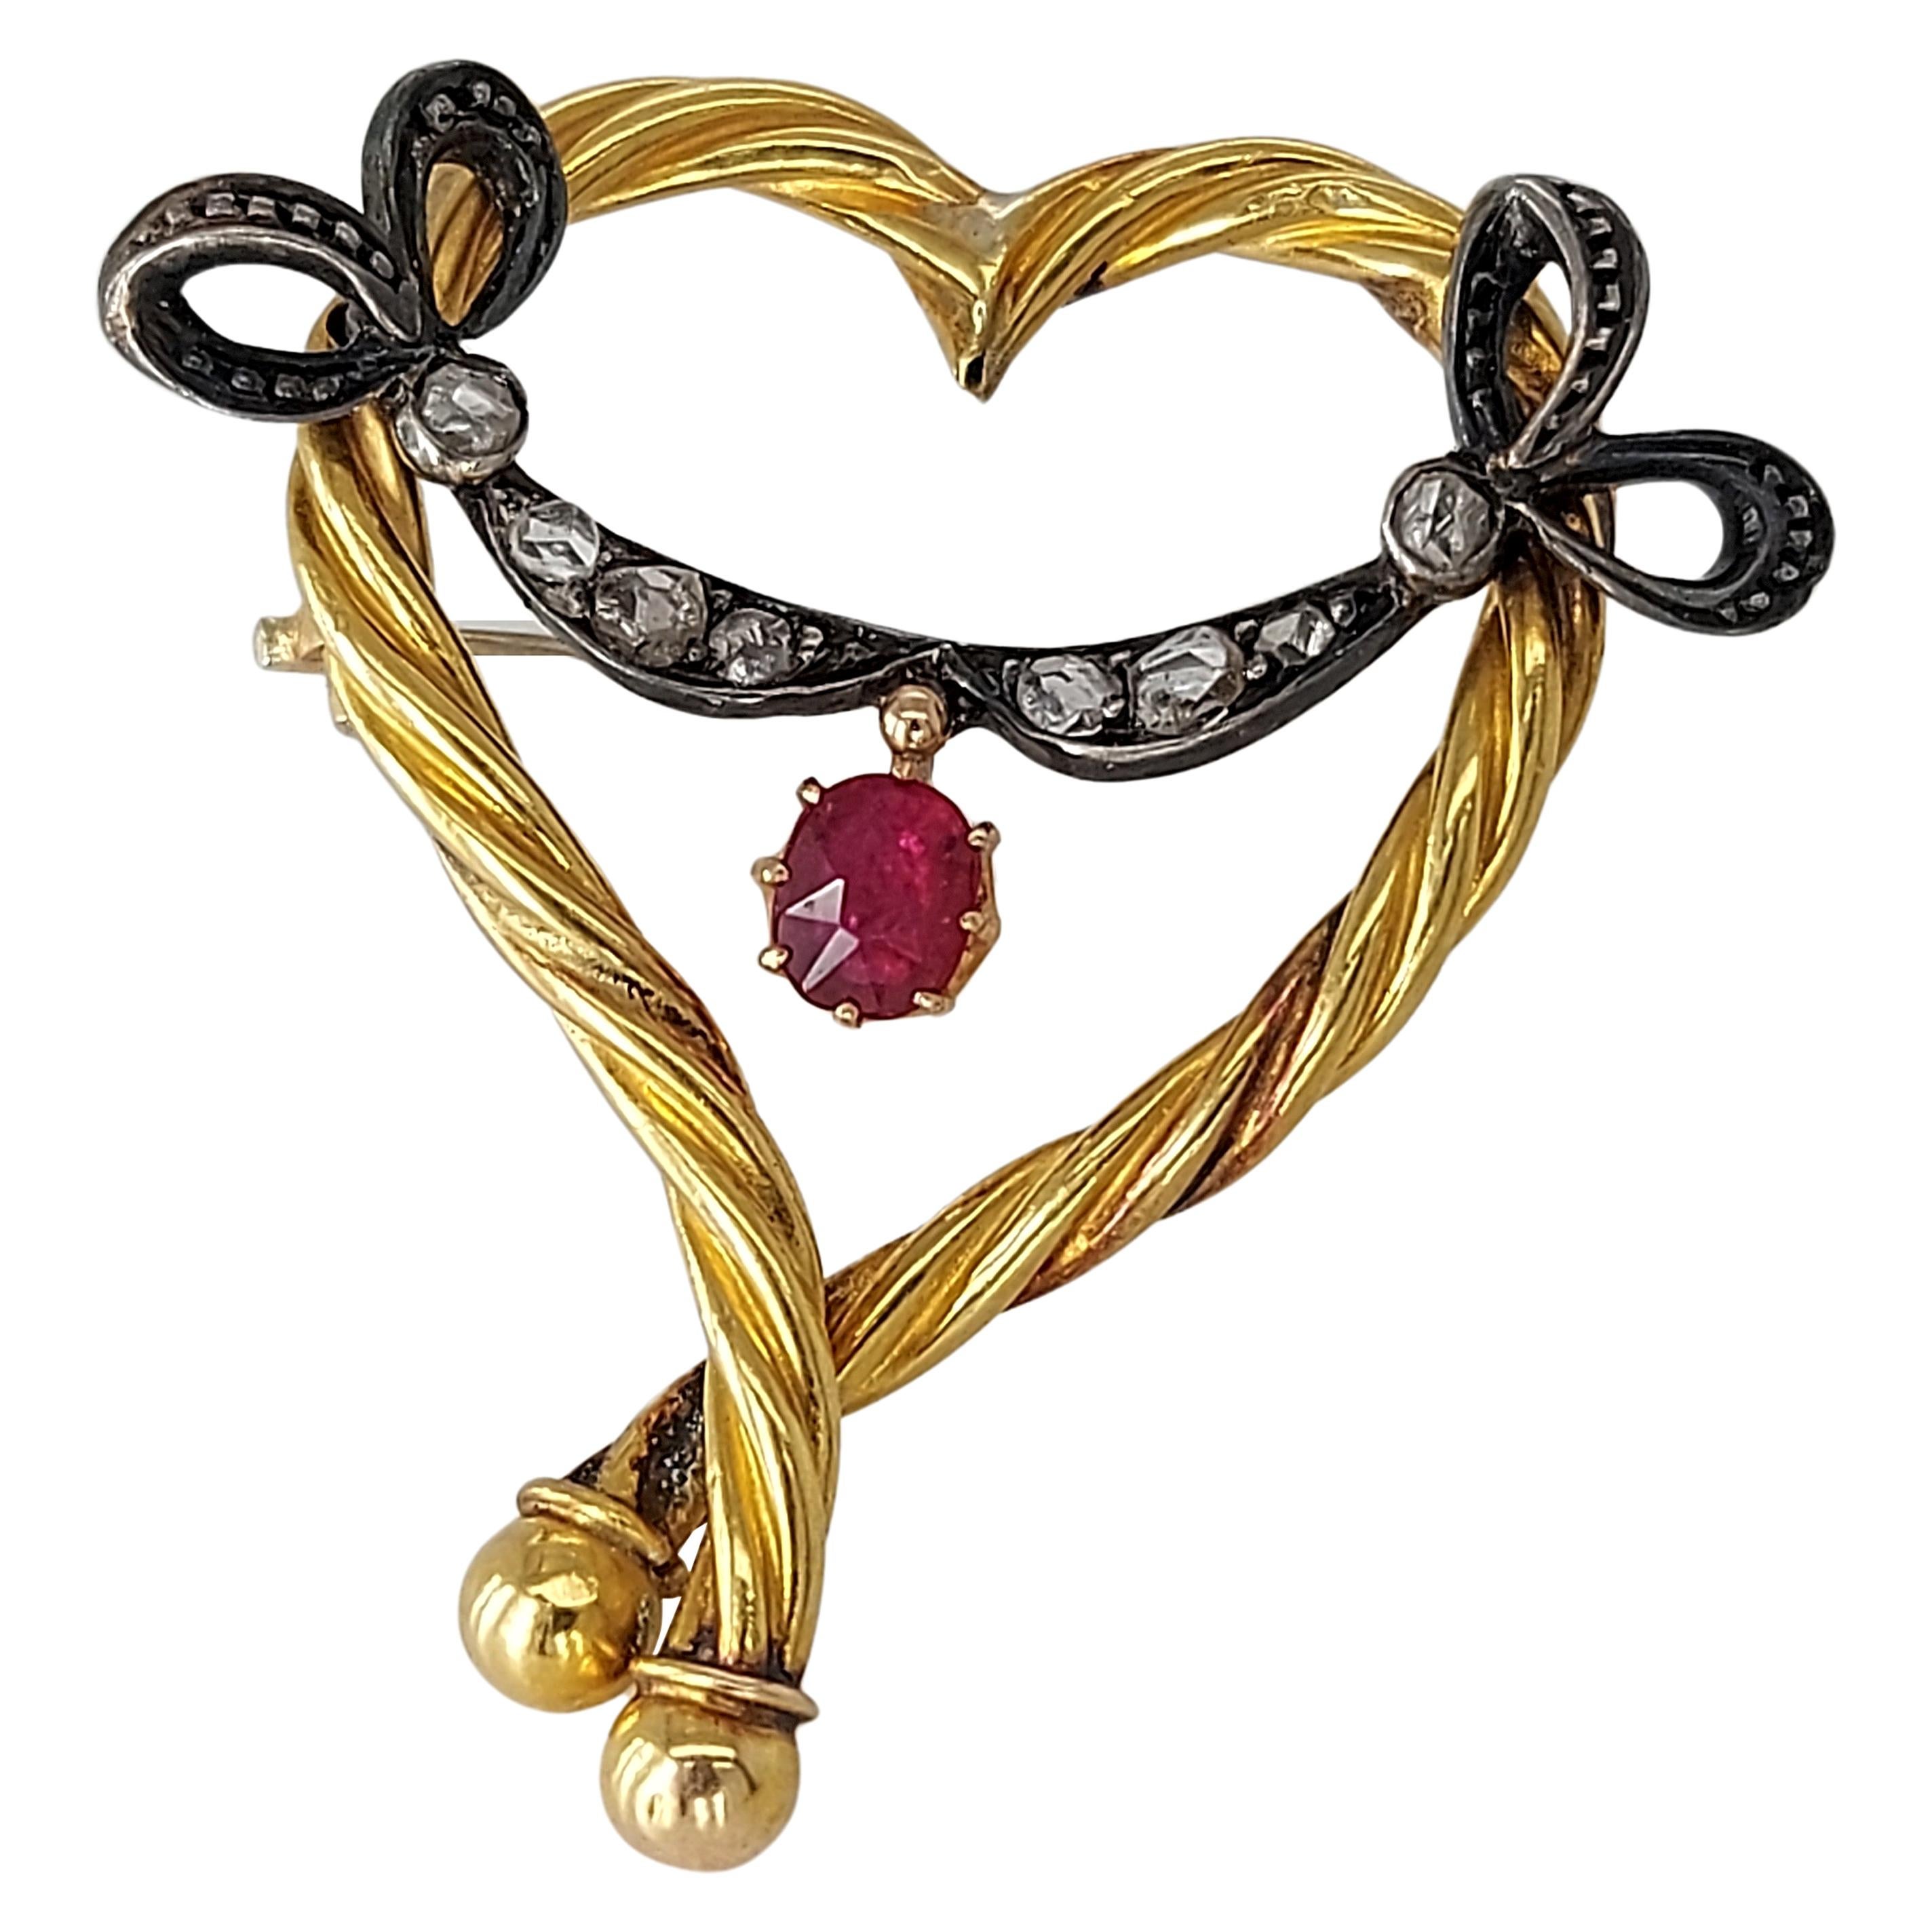 18kt Gold Heart Shape Brooch with Natural Ruby & Old Cut Diamonds